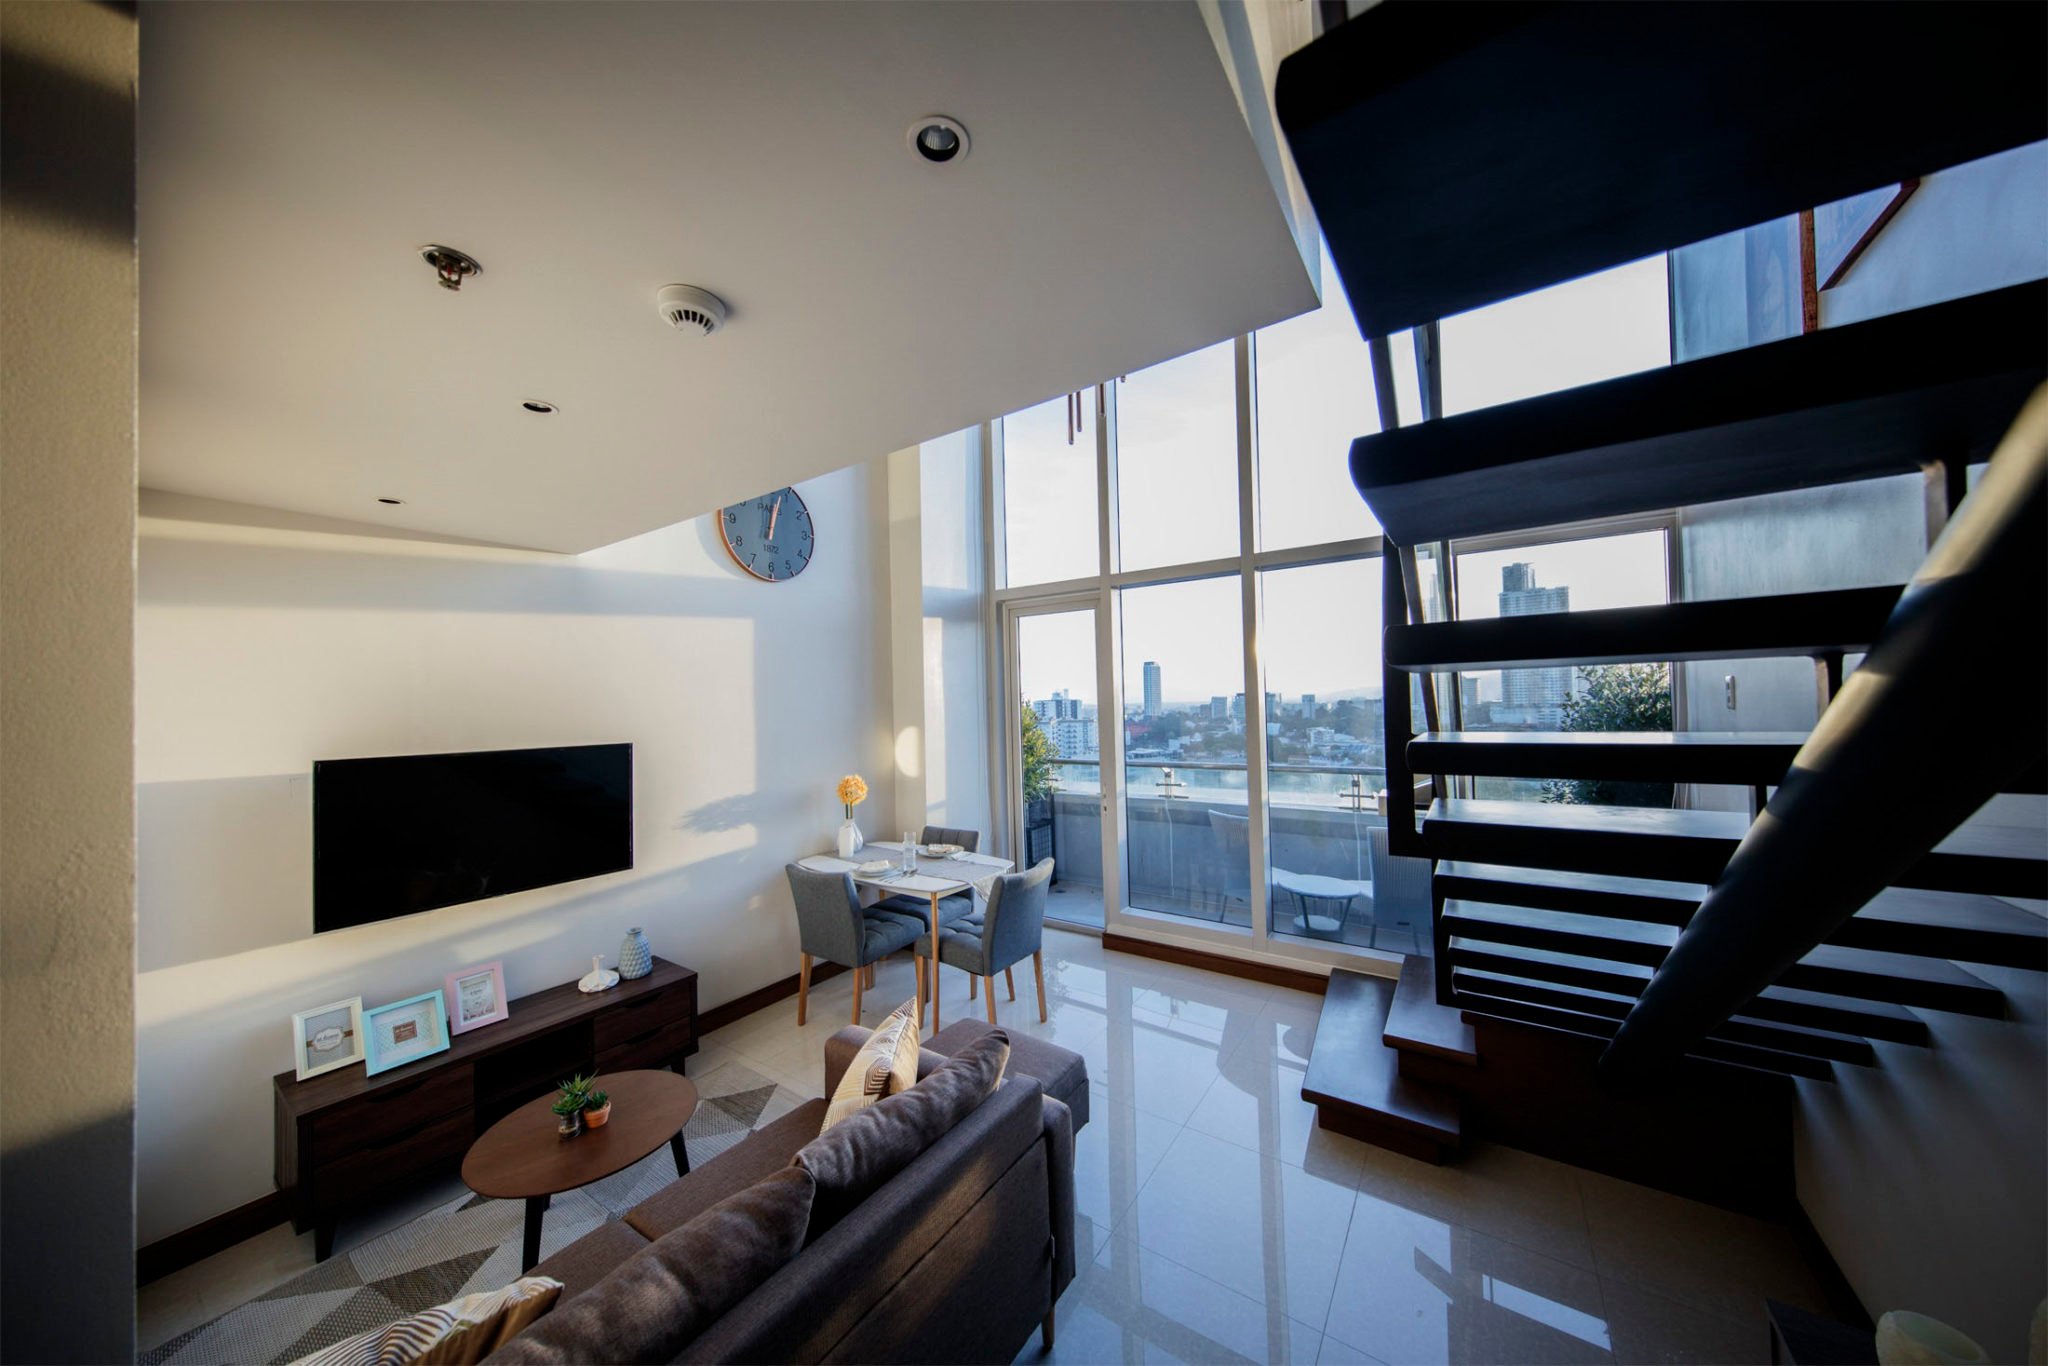 1 Bedroom Loft For Rent Search Your Favorite Image